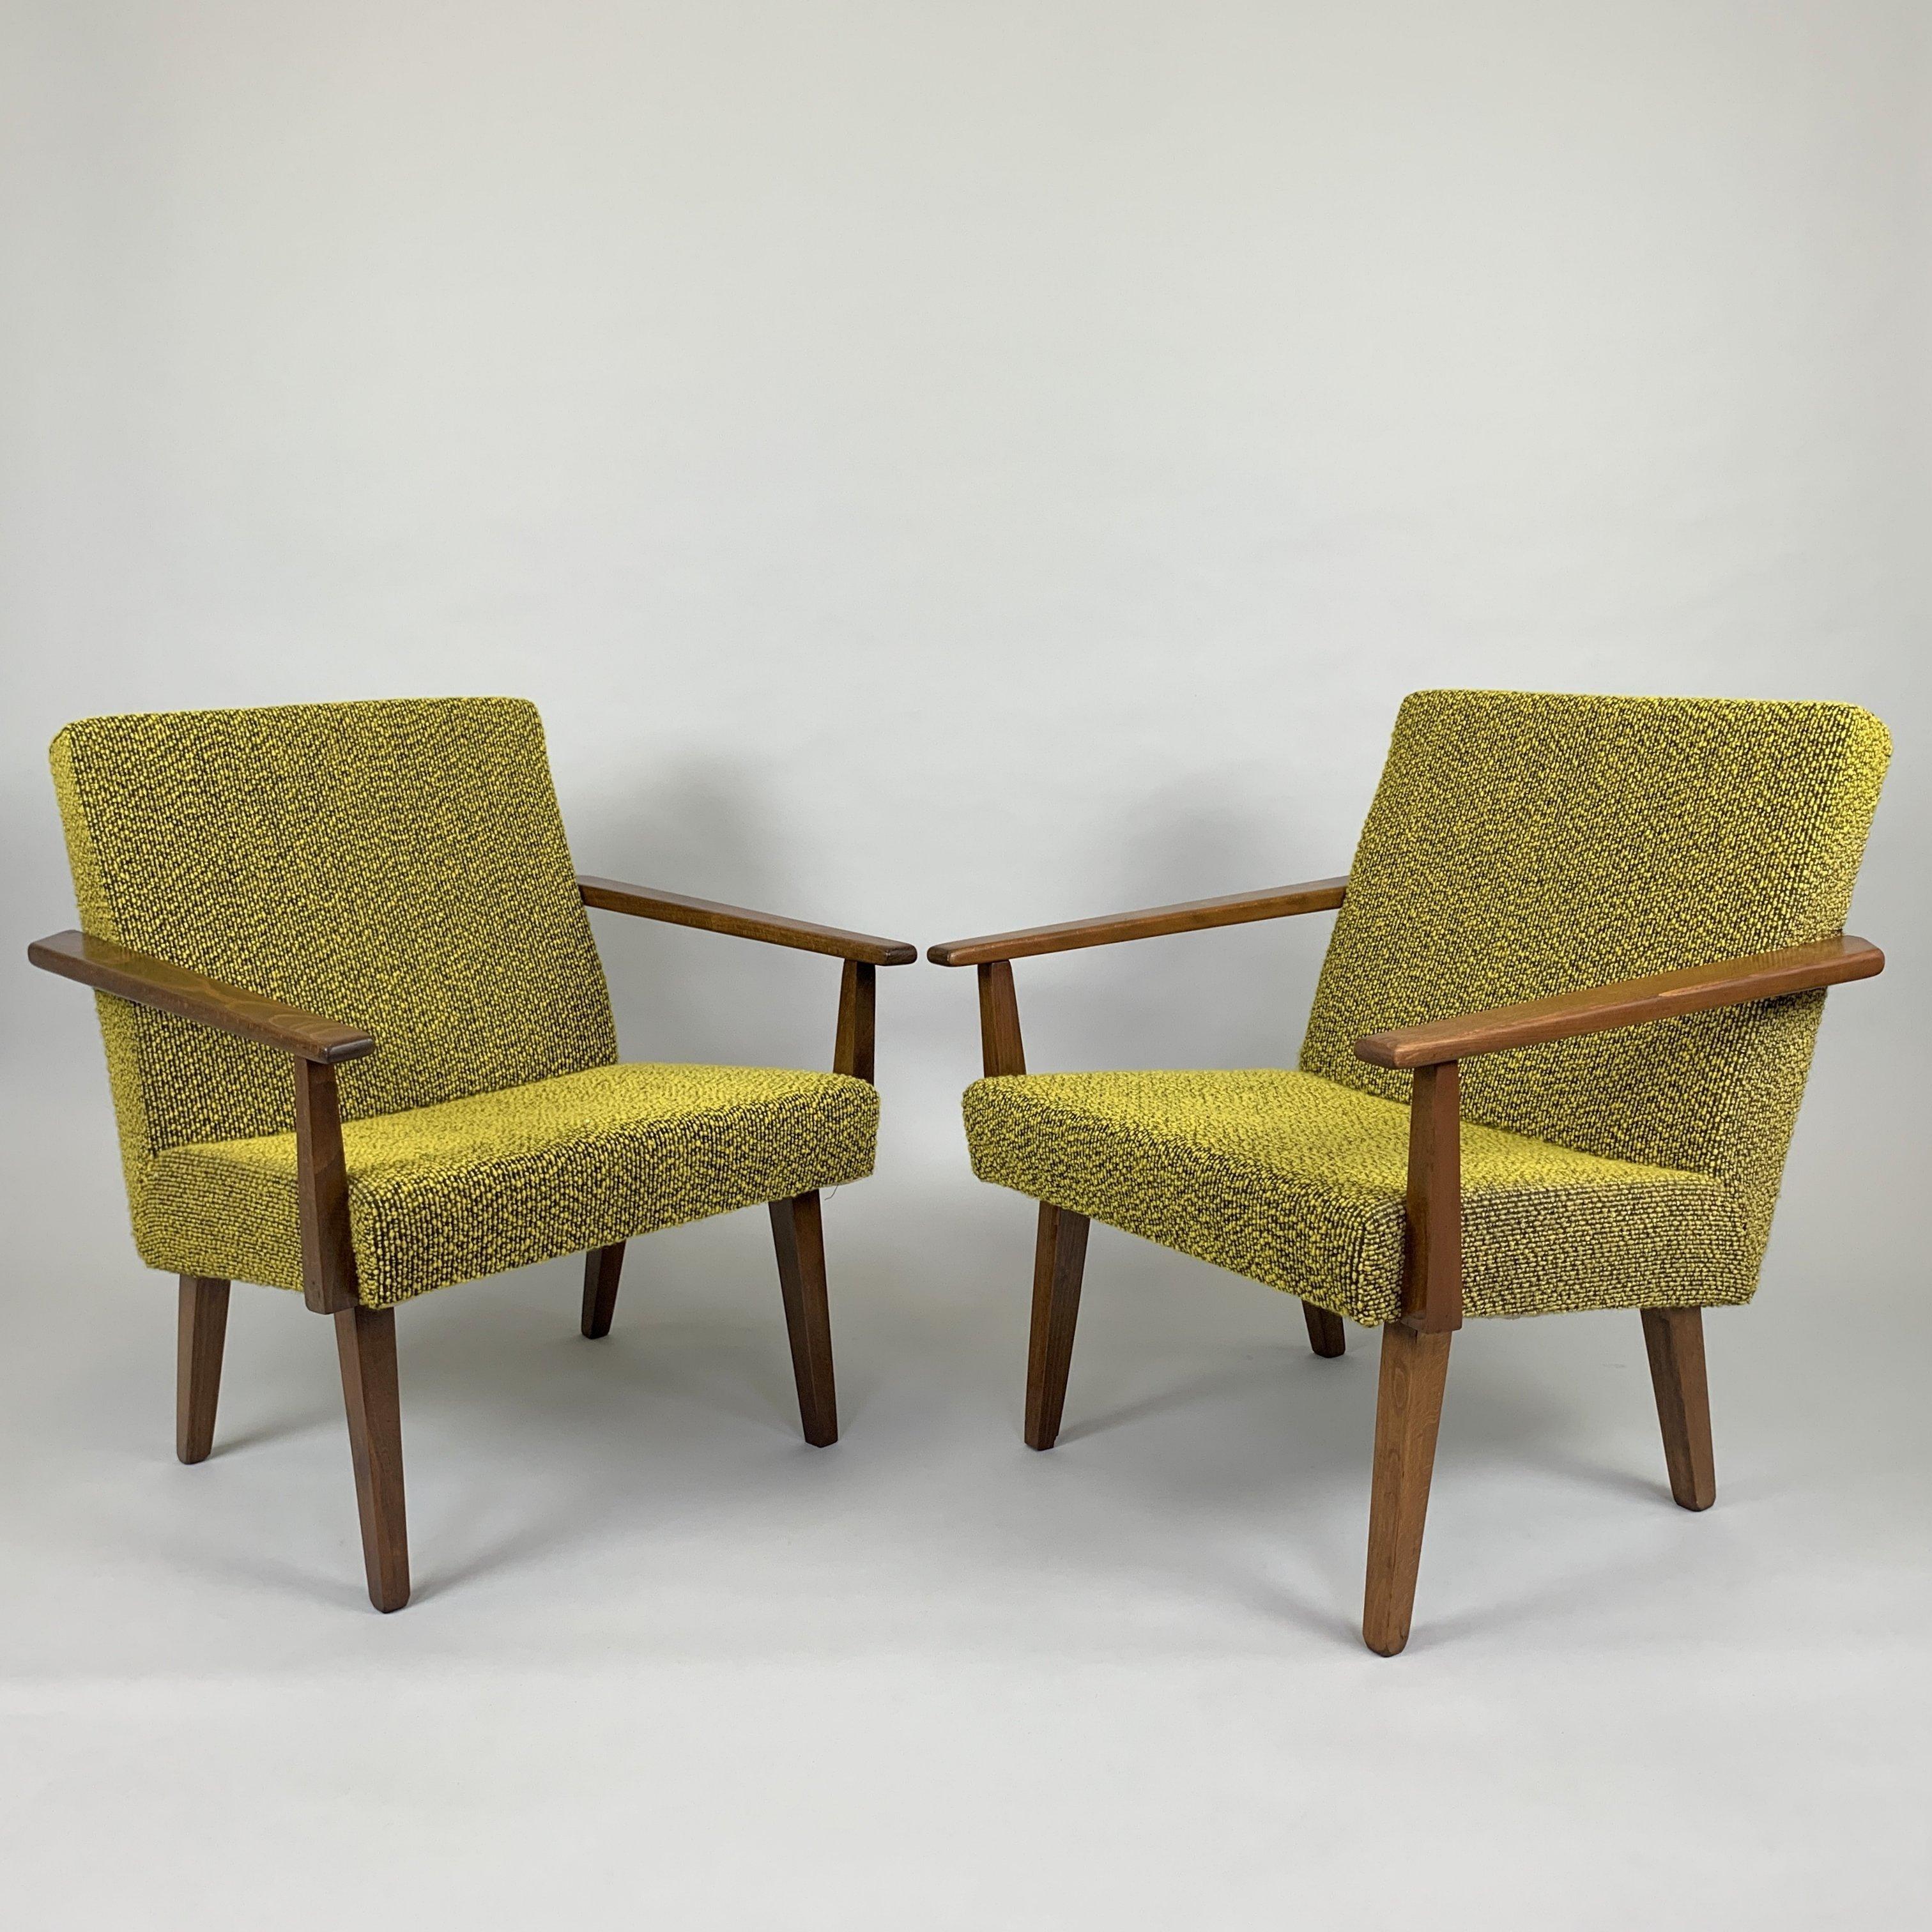 Pair of lovely vintage armchairs made in former Czechoslovakia in 1960's. The wooden parts were refurbished. Upholstery is in original, well-preserved condition.